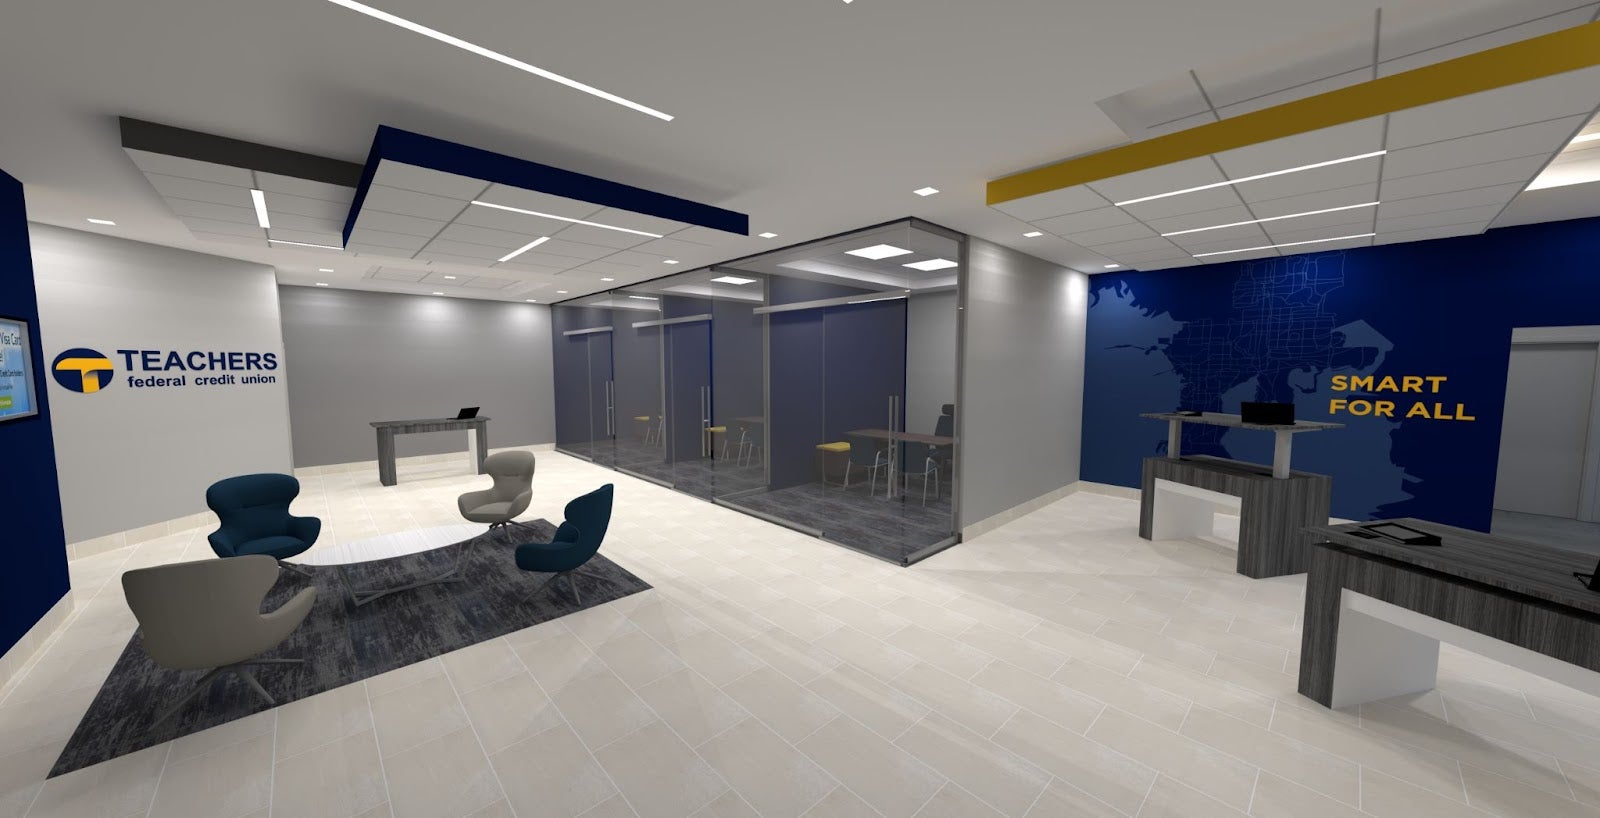 Rendering of Teachers Federal Credit Union’s new branch in Tampa, Florida including teller stations, meeting rooms, and a modern lobby.